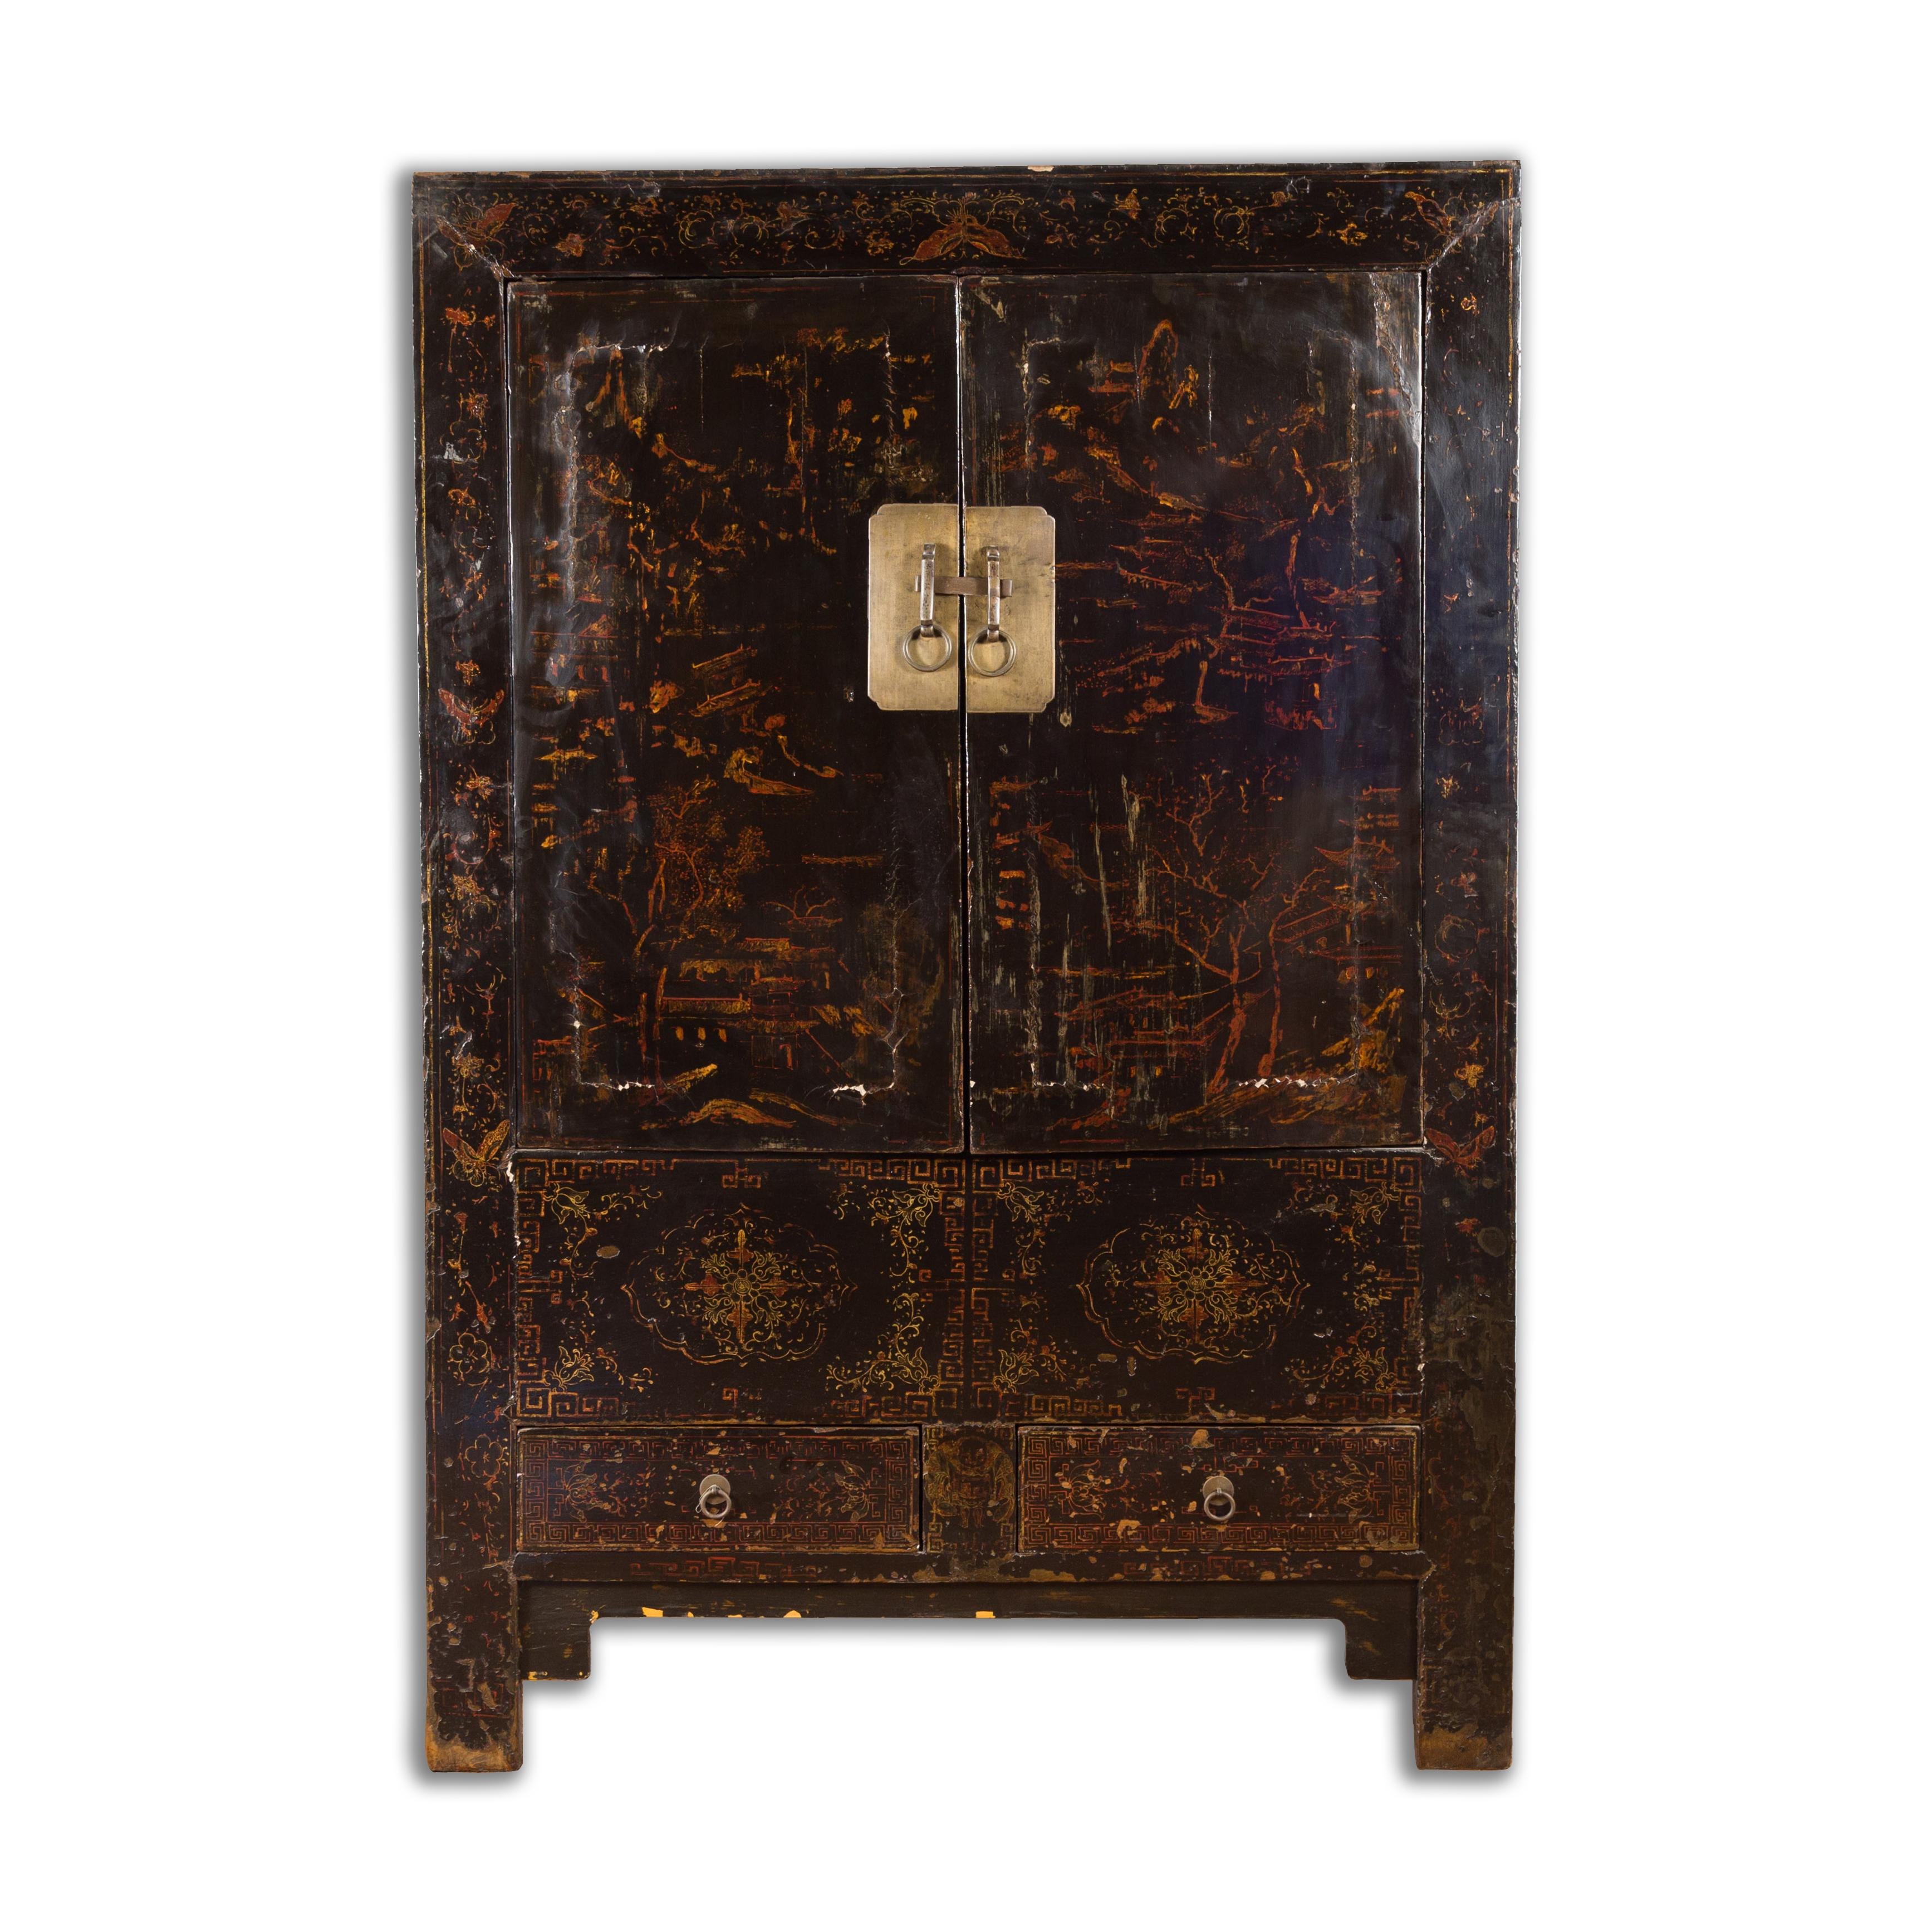 Chinese Qing Dynasty 19th Century Cabinet with Original Black Lacquer Finish For Sale 13